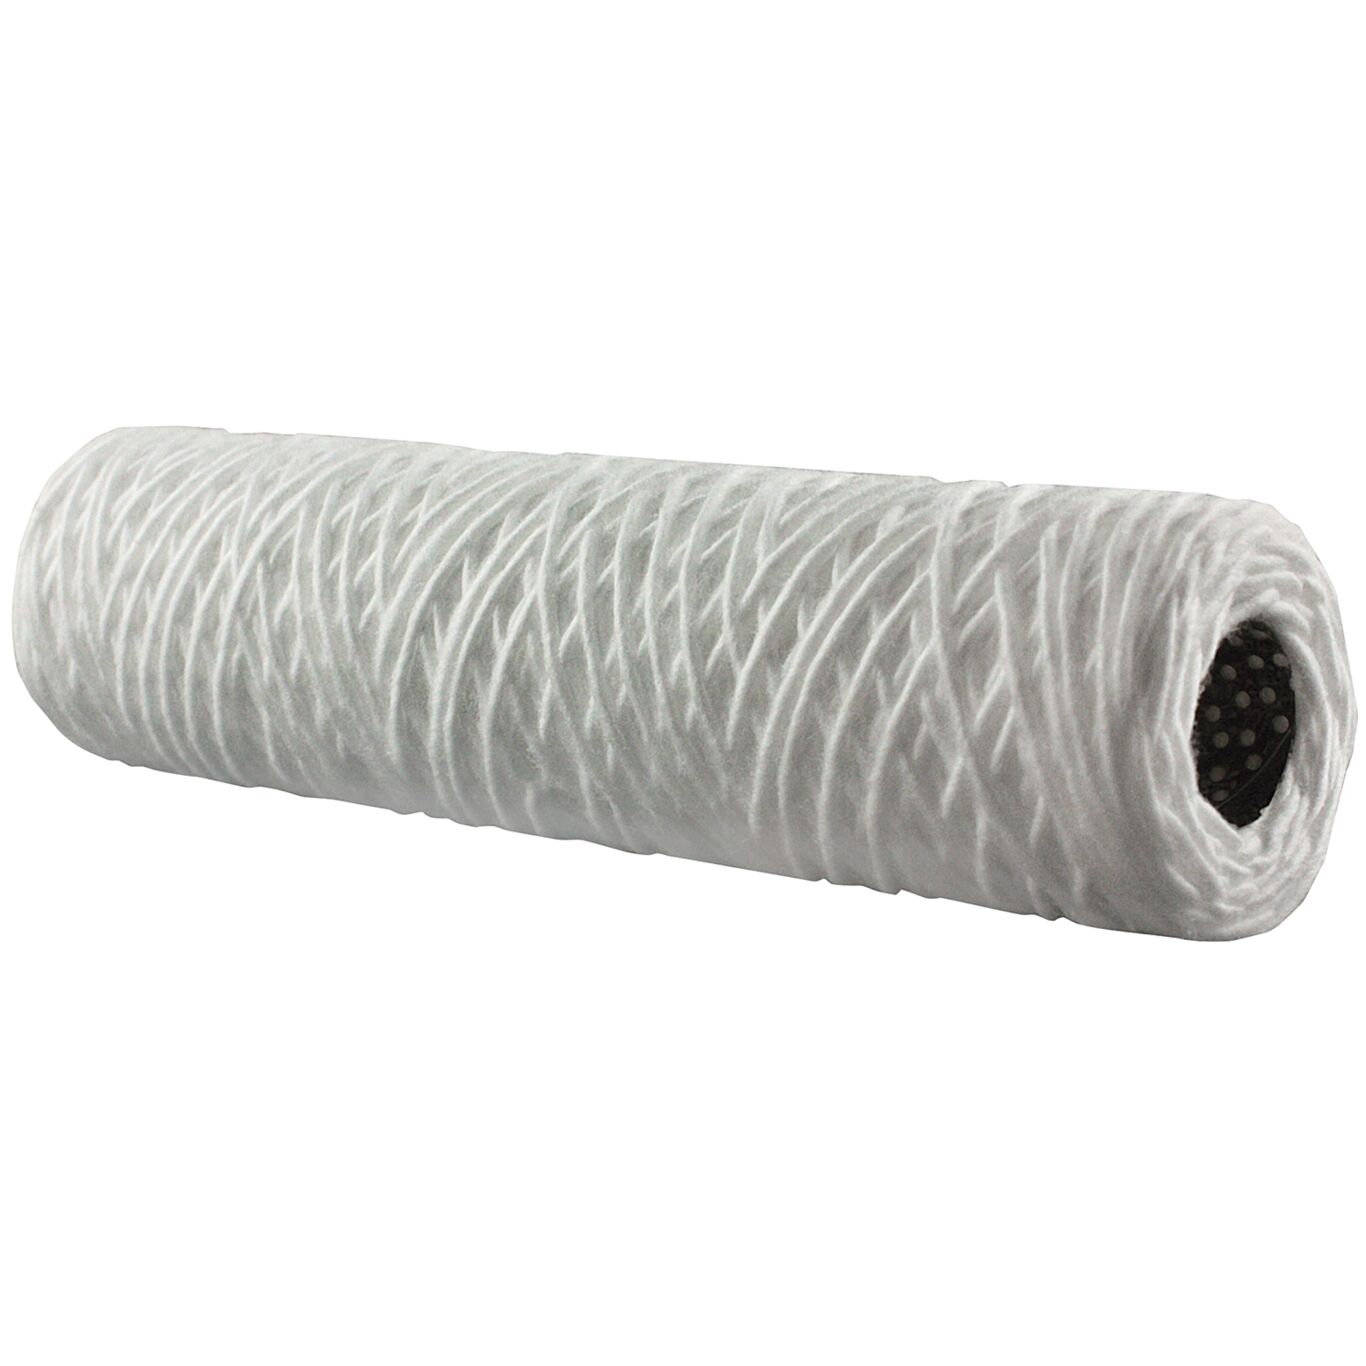 Product Image - PW Sediment Wound Filter Cartridge